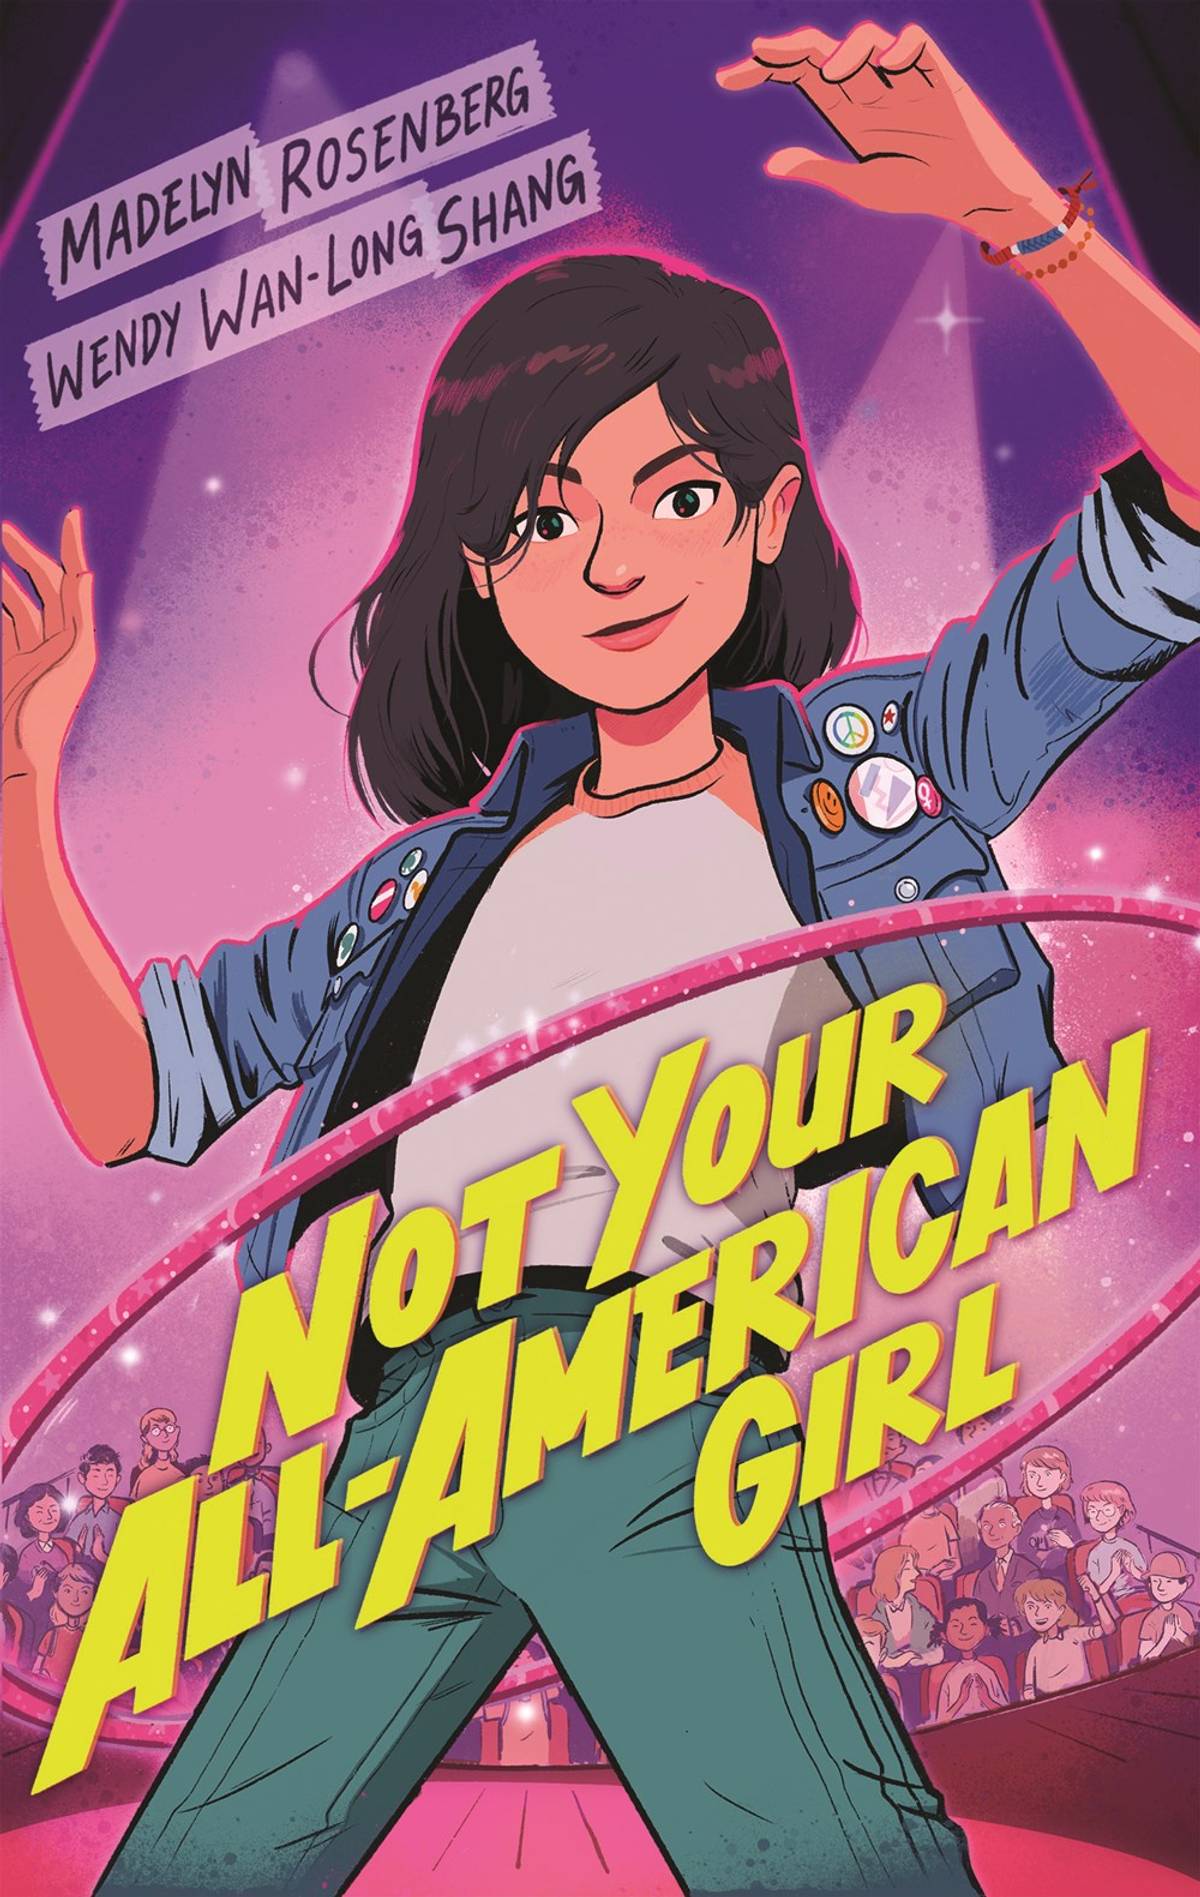 ‘Not Your All-American Girl’ by Madelyn Rosenberg and Wendy Wan-Long Shang